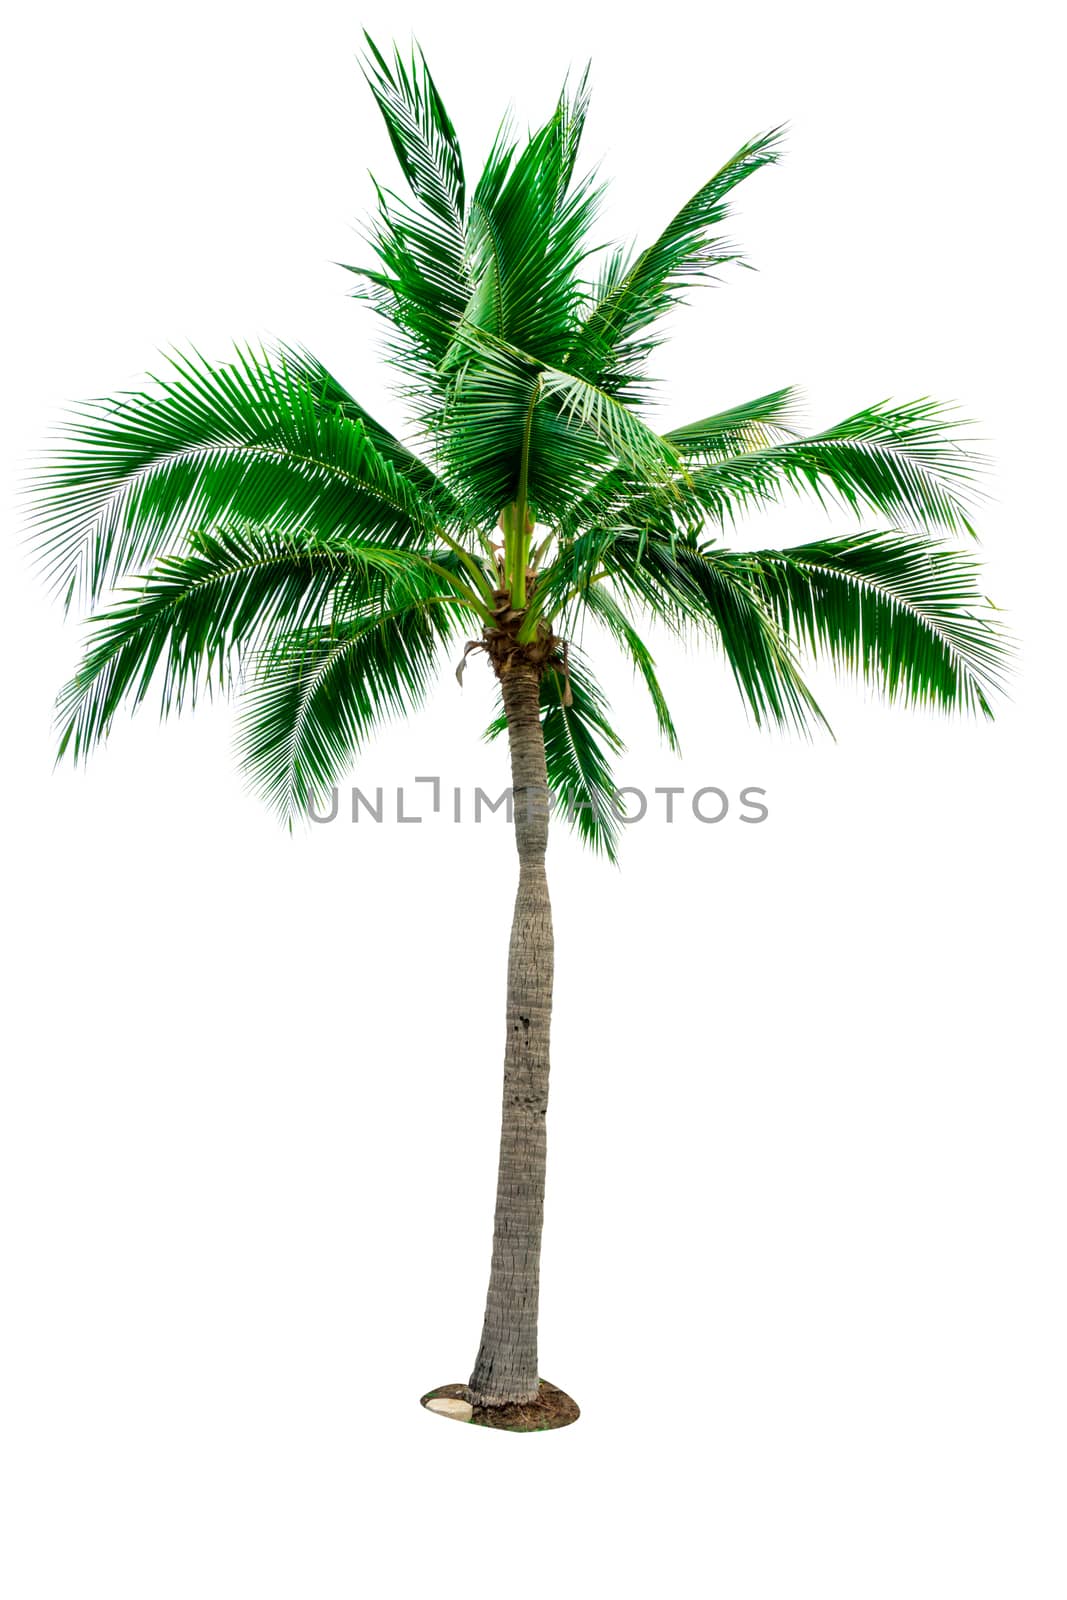 Coconut tree isolated on white background with copy space. Used for advertising decorative architecture. Summer and beach concept. Tropical palm tree. by Fahroni